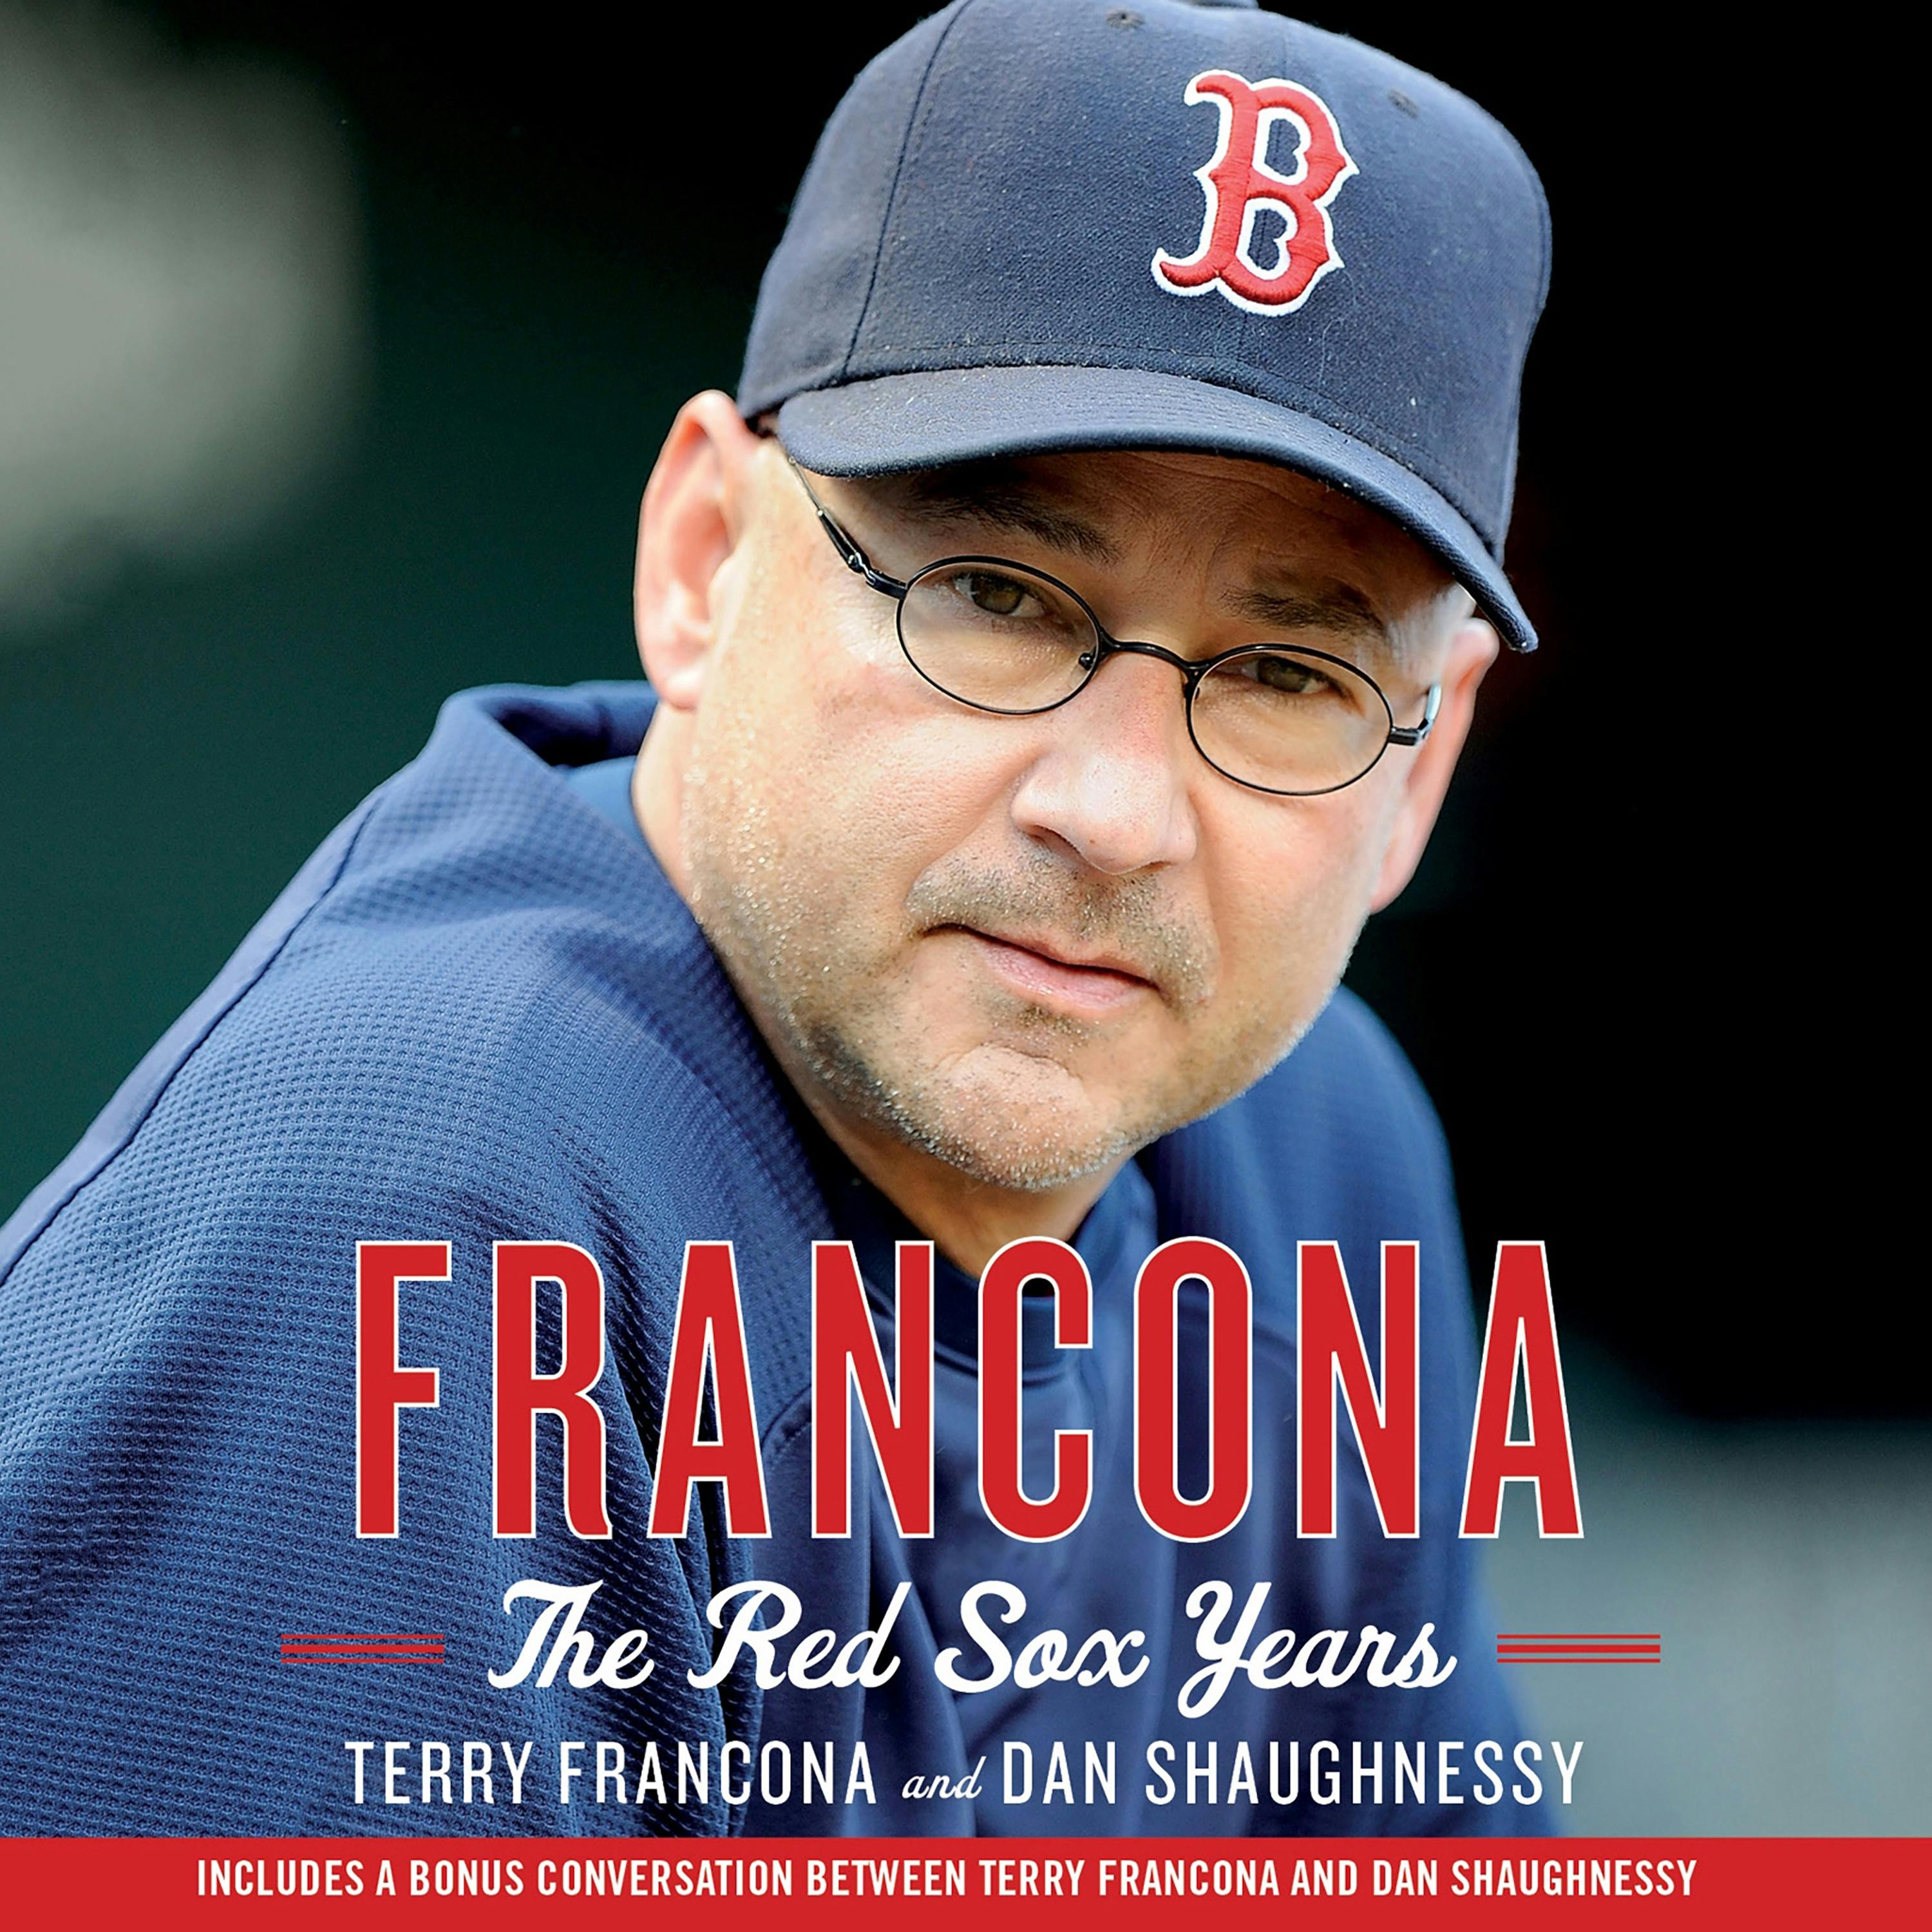  Francona: The Red Sox Years: 9781427233585: Francona, Terry,  Shaughnessy, Dan, Gurner, Jeff: Clothing, Shoes & Jewelry